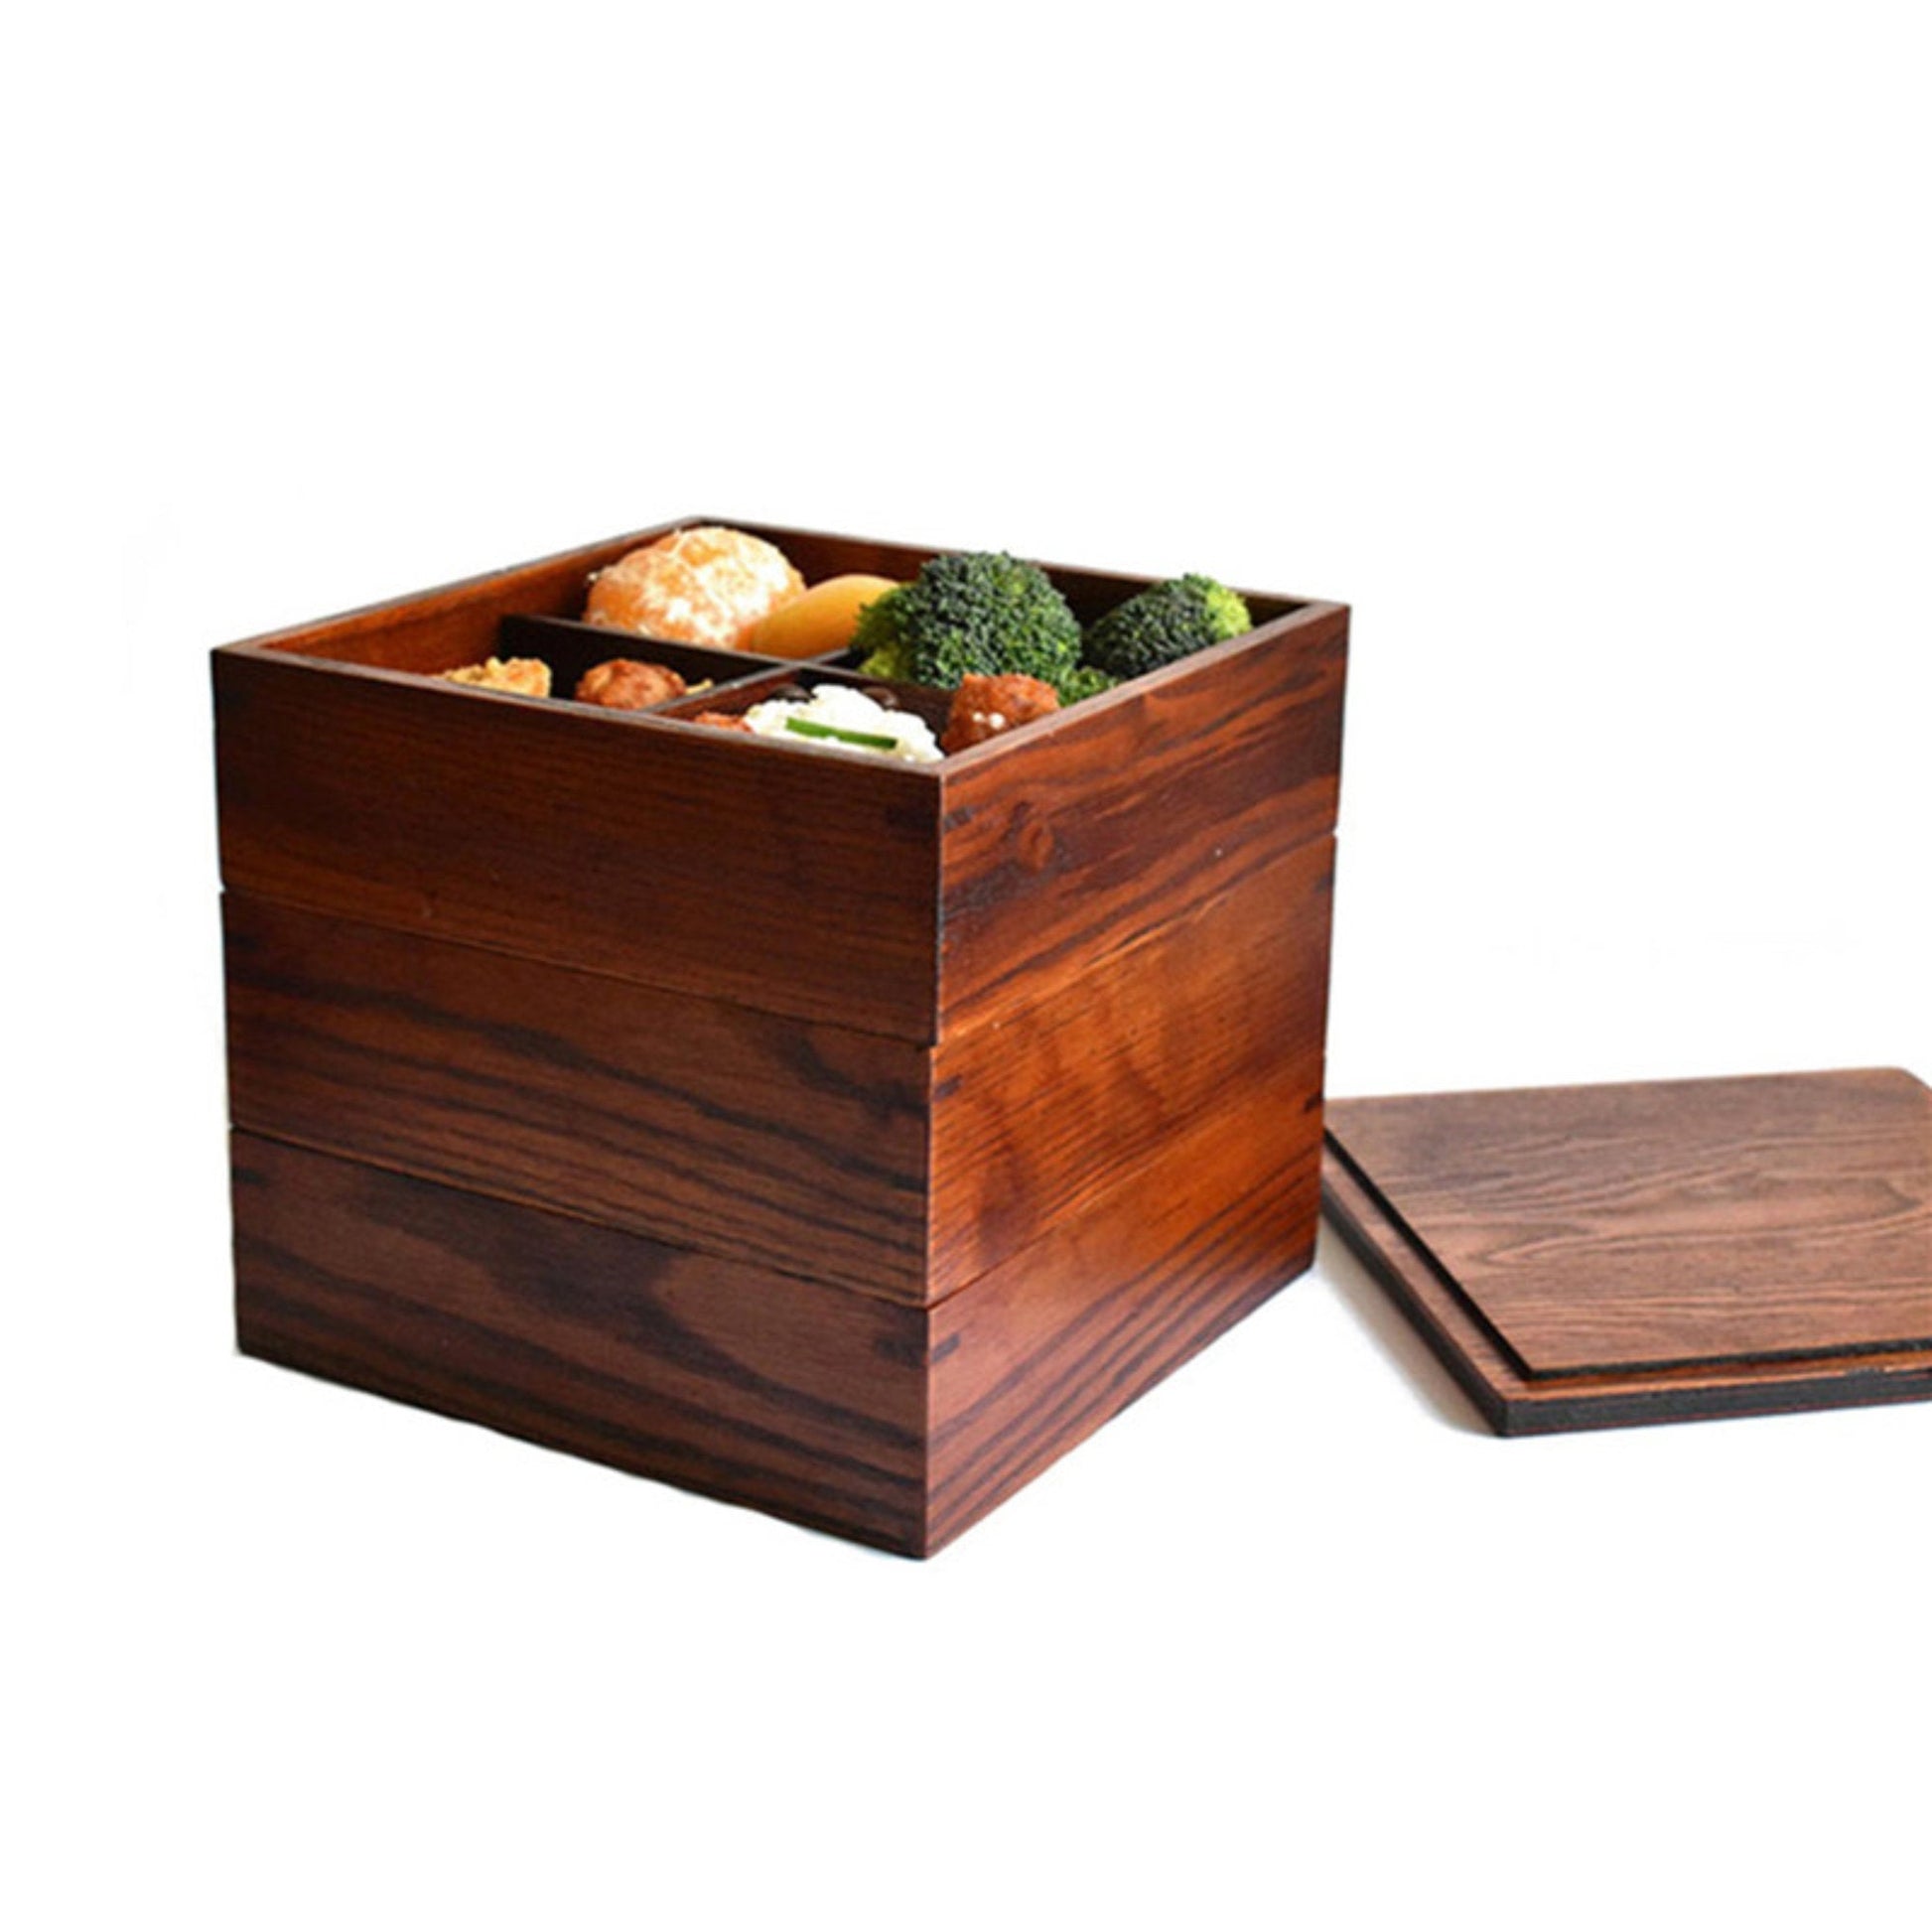 Dark Wood Squared Bento Box, Japanese Style Lunch Box | Picnic, Bento Box Accessories, Food Storage Container, Eco-Friendly - -